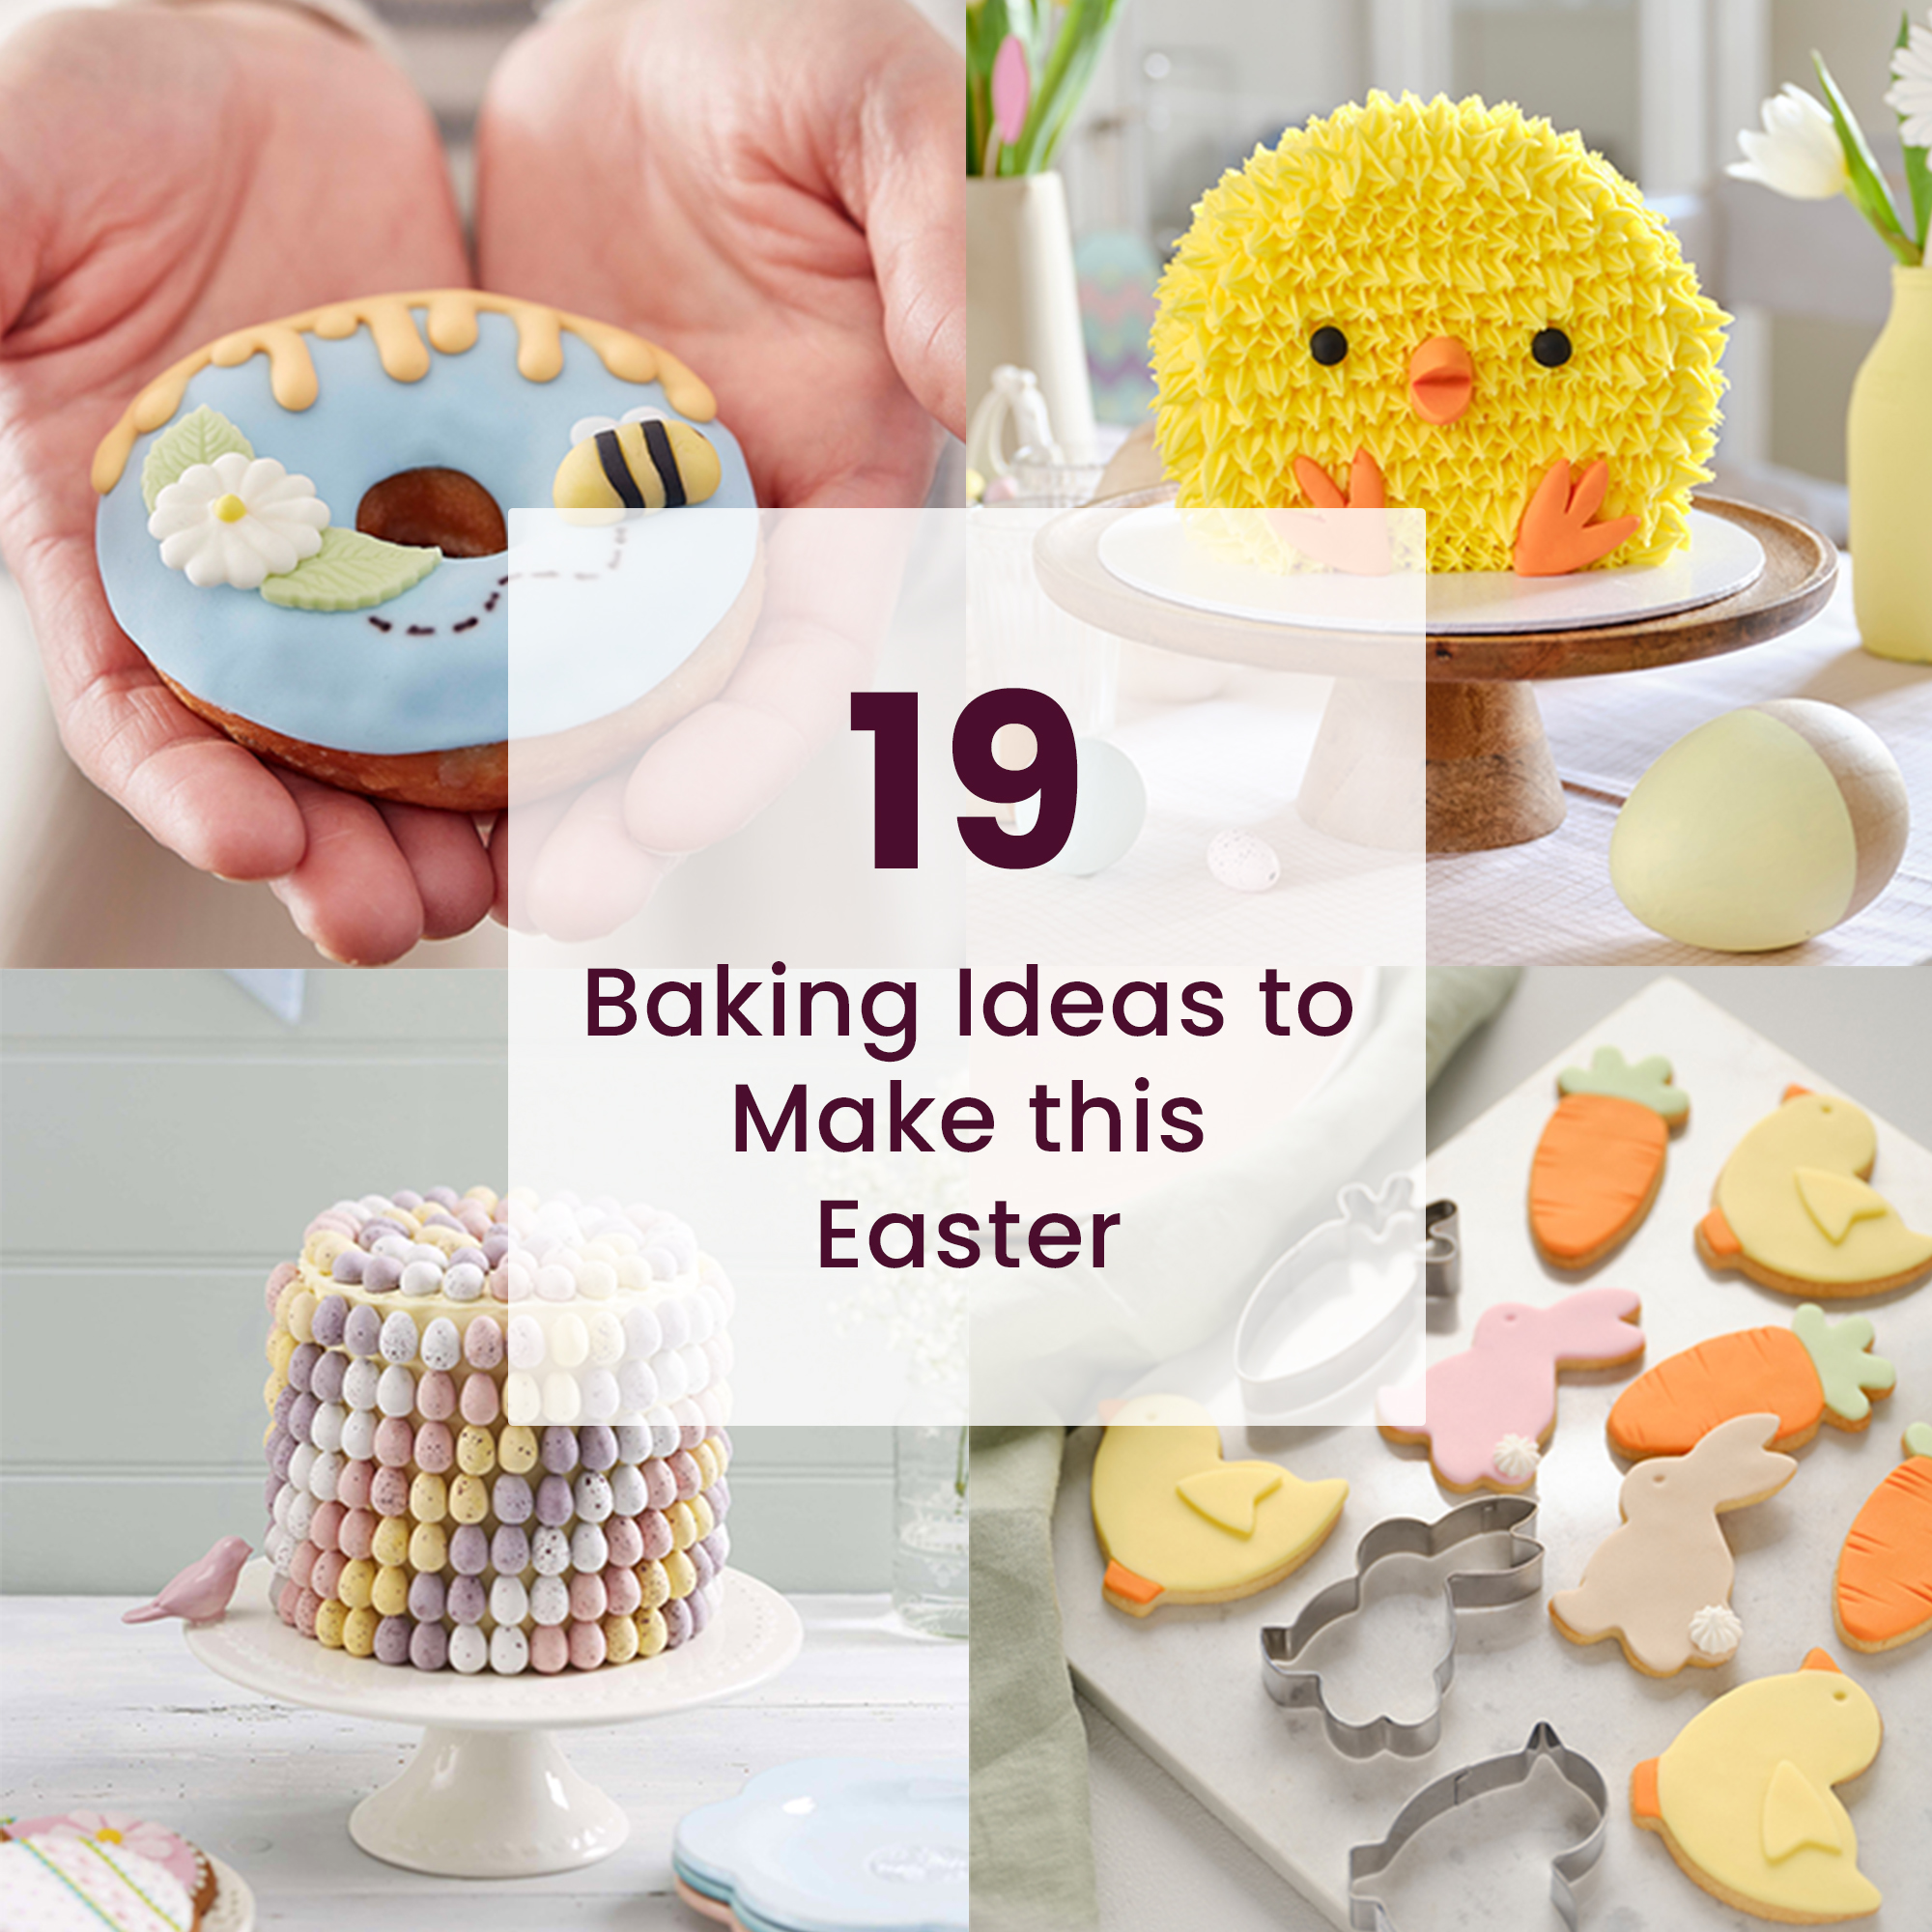 19 Baking Ideas to Make this Easter